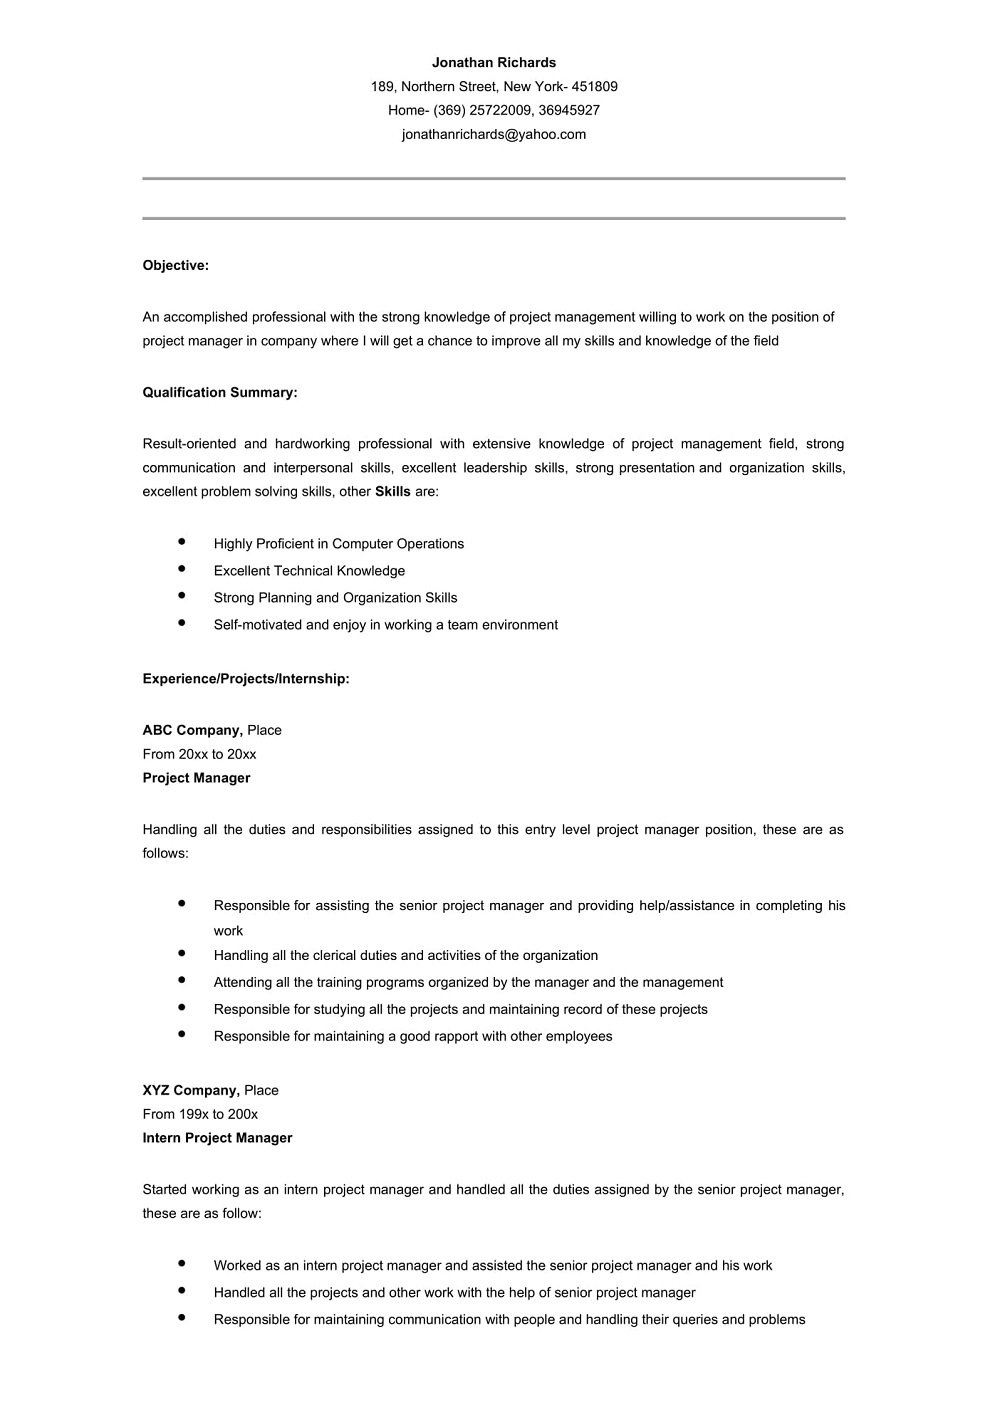 Sample Entry Level Project Manager Resume